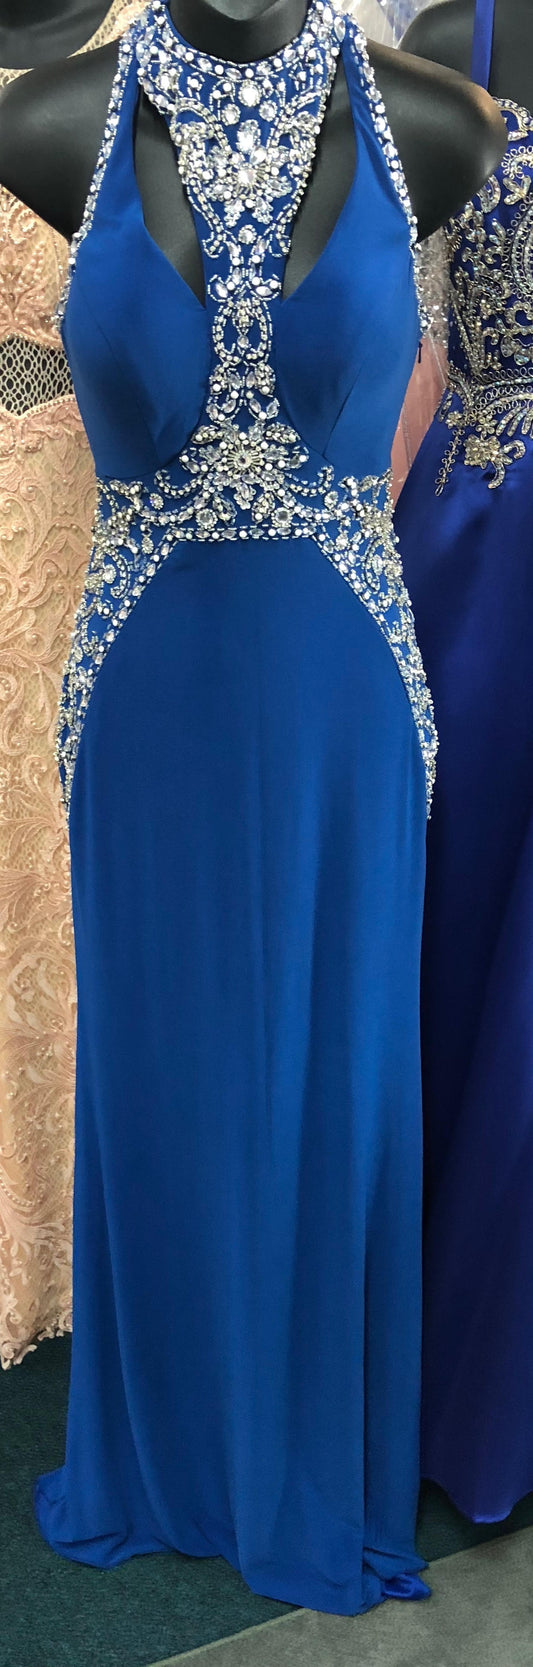 JVN33755 Sleeveless Embellished Prom Dress JVN jovani 33755 size 0 royal blue pageant gown evening gown 